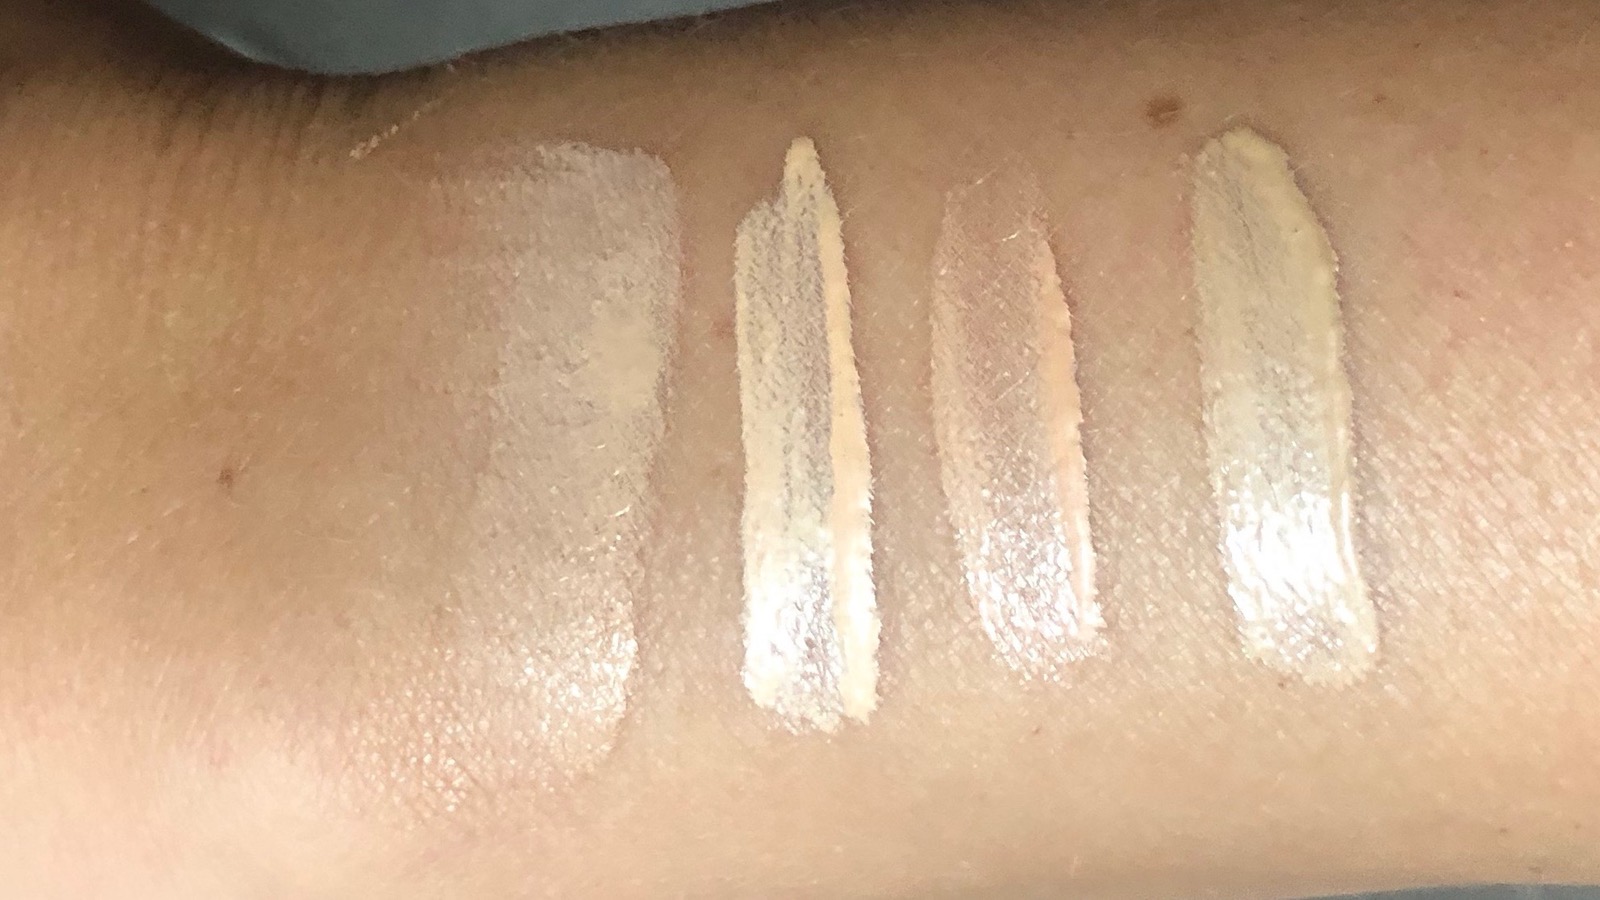 Charlotte Tilbury nude Hollywood Flawless Filter